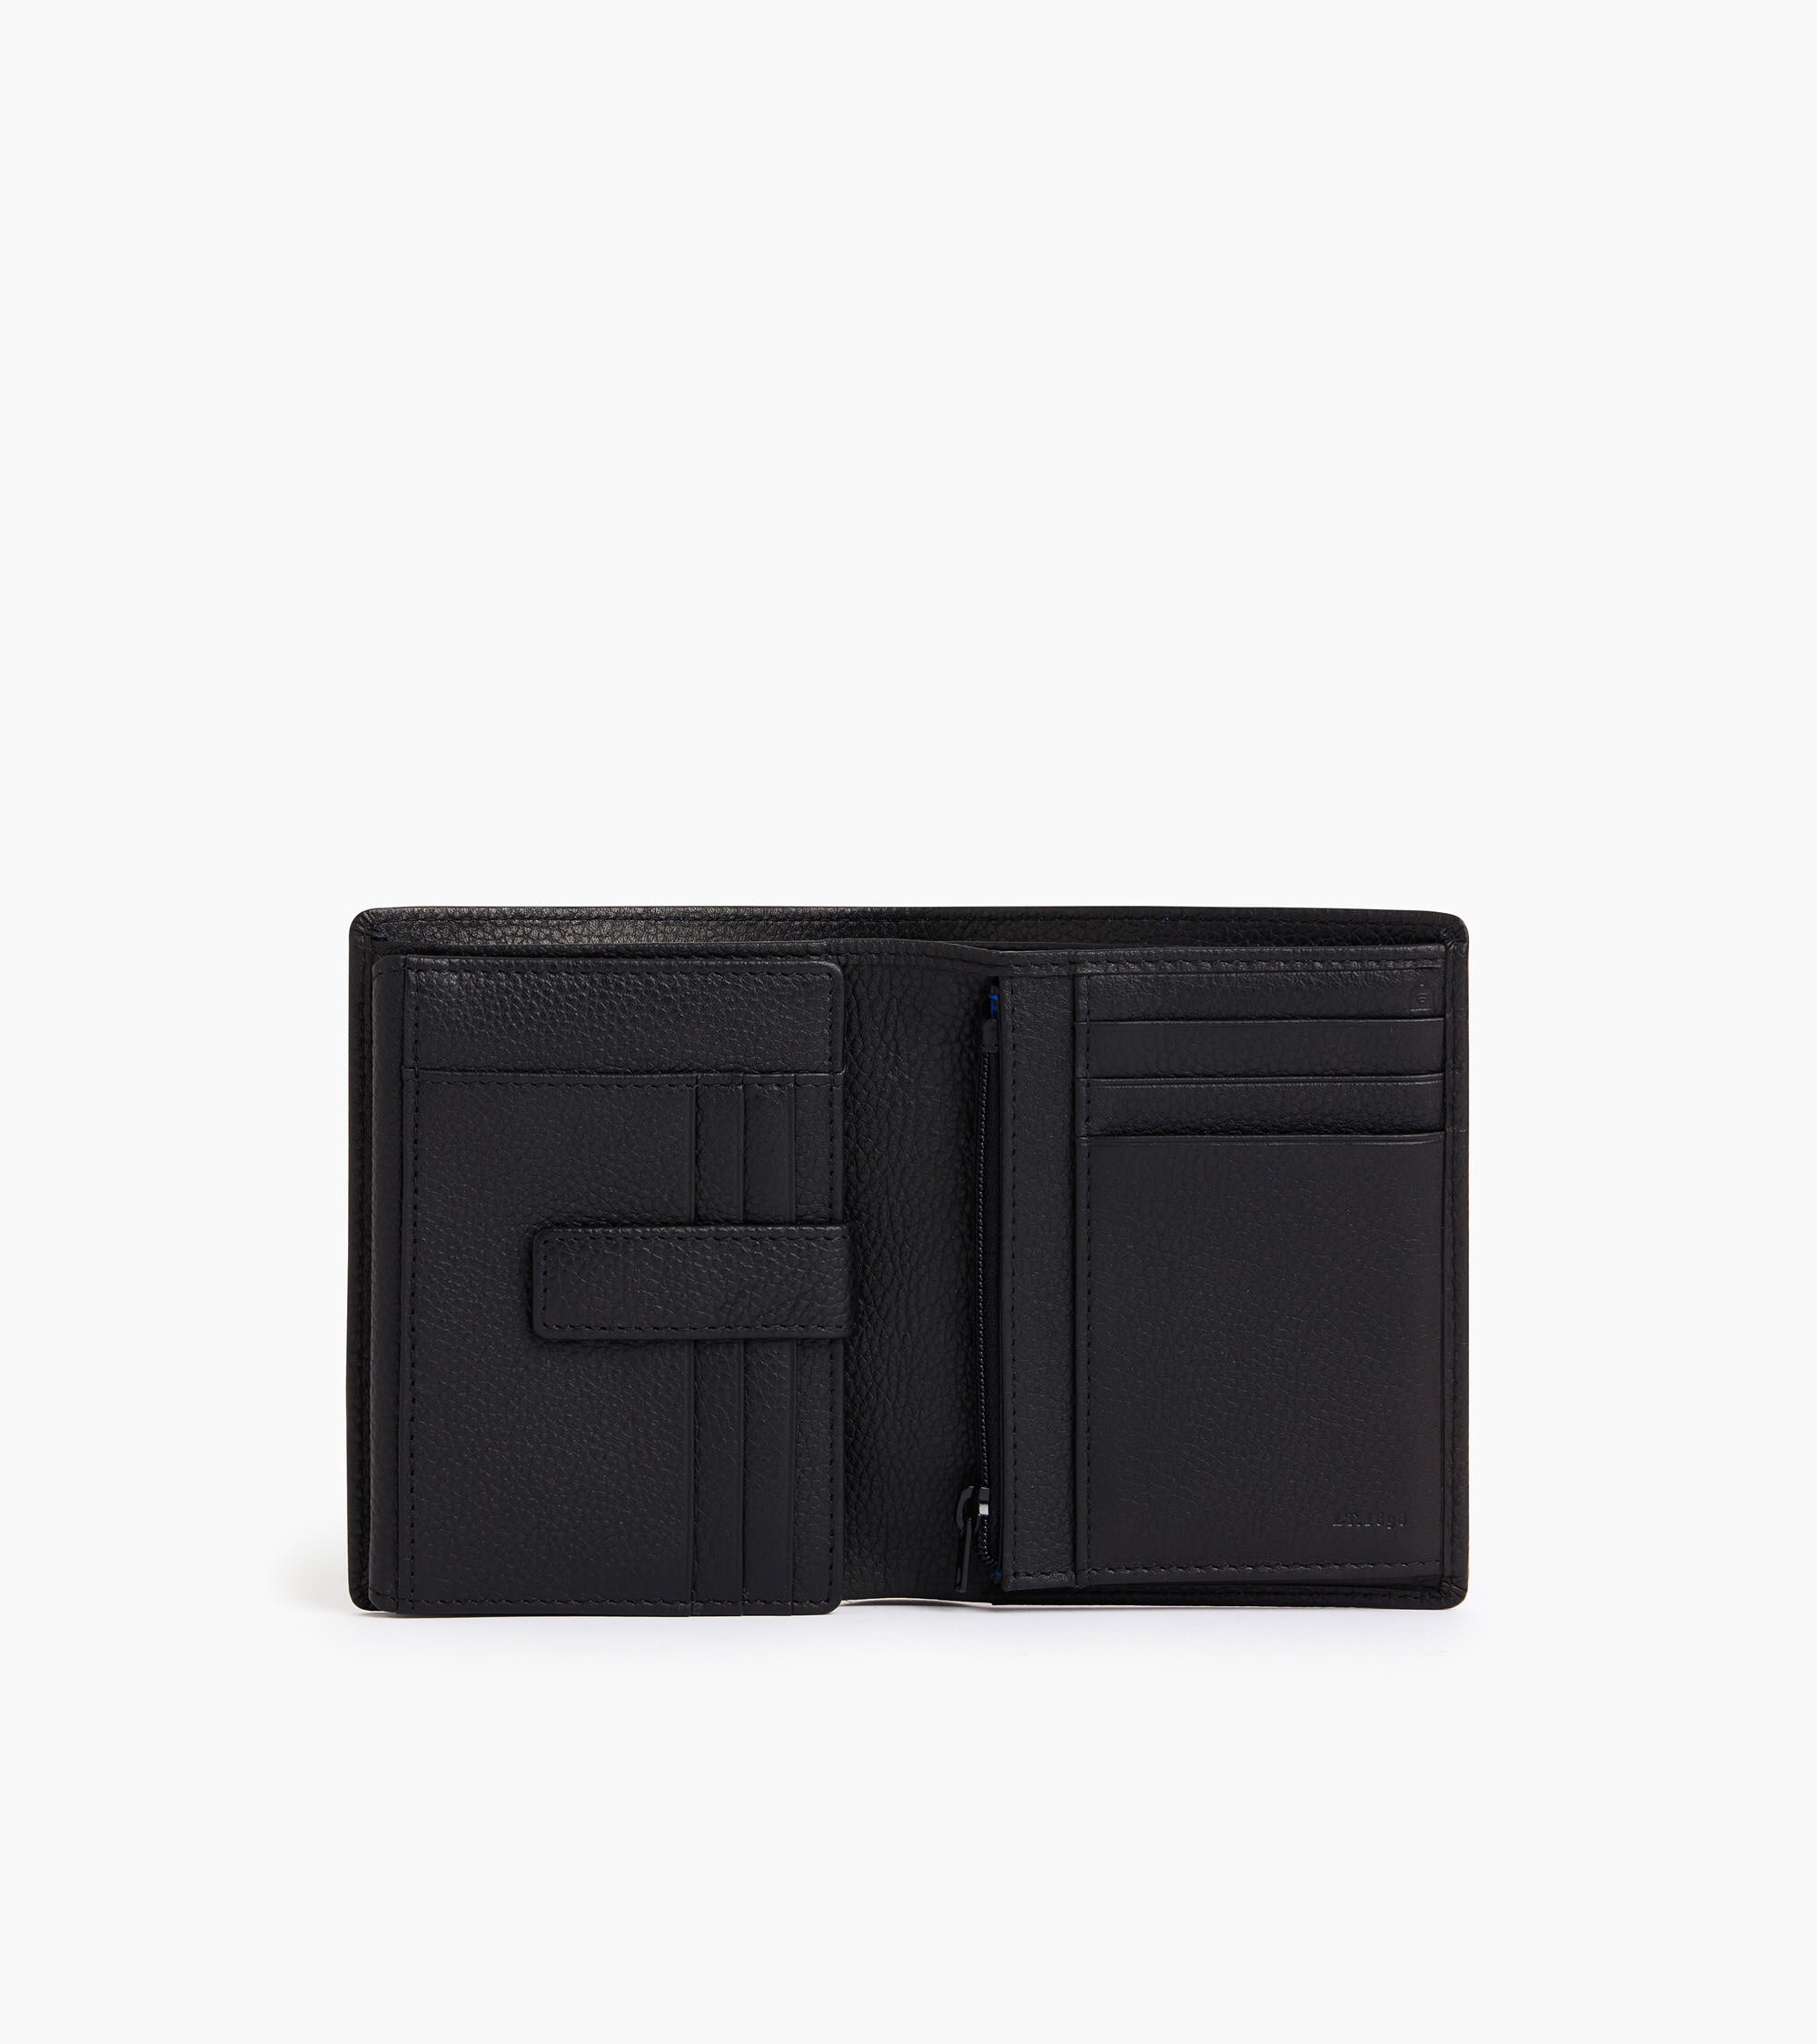 Charles adjustable flexible wallet in grained leather